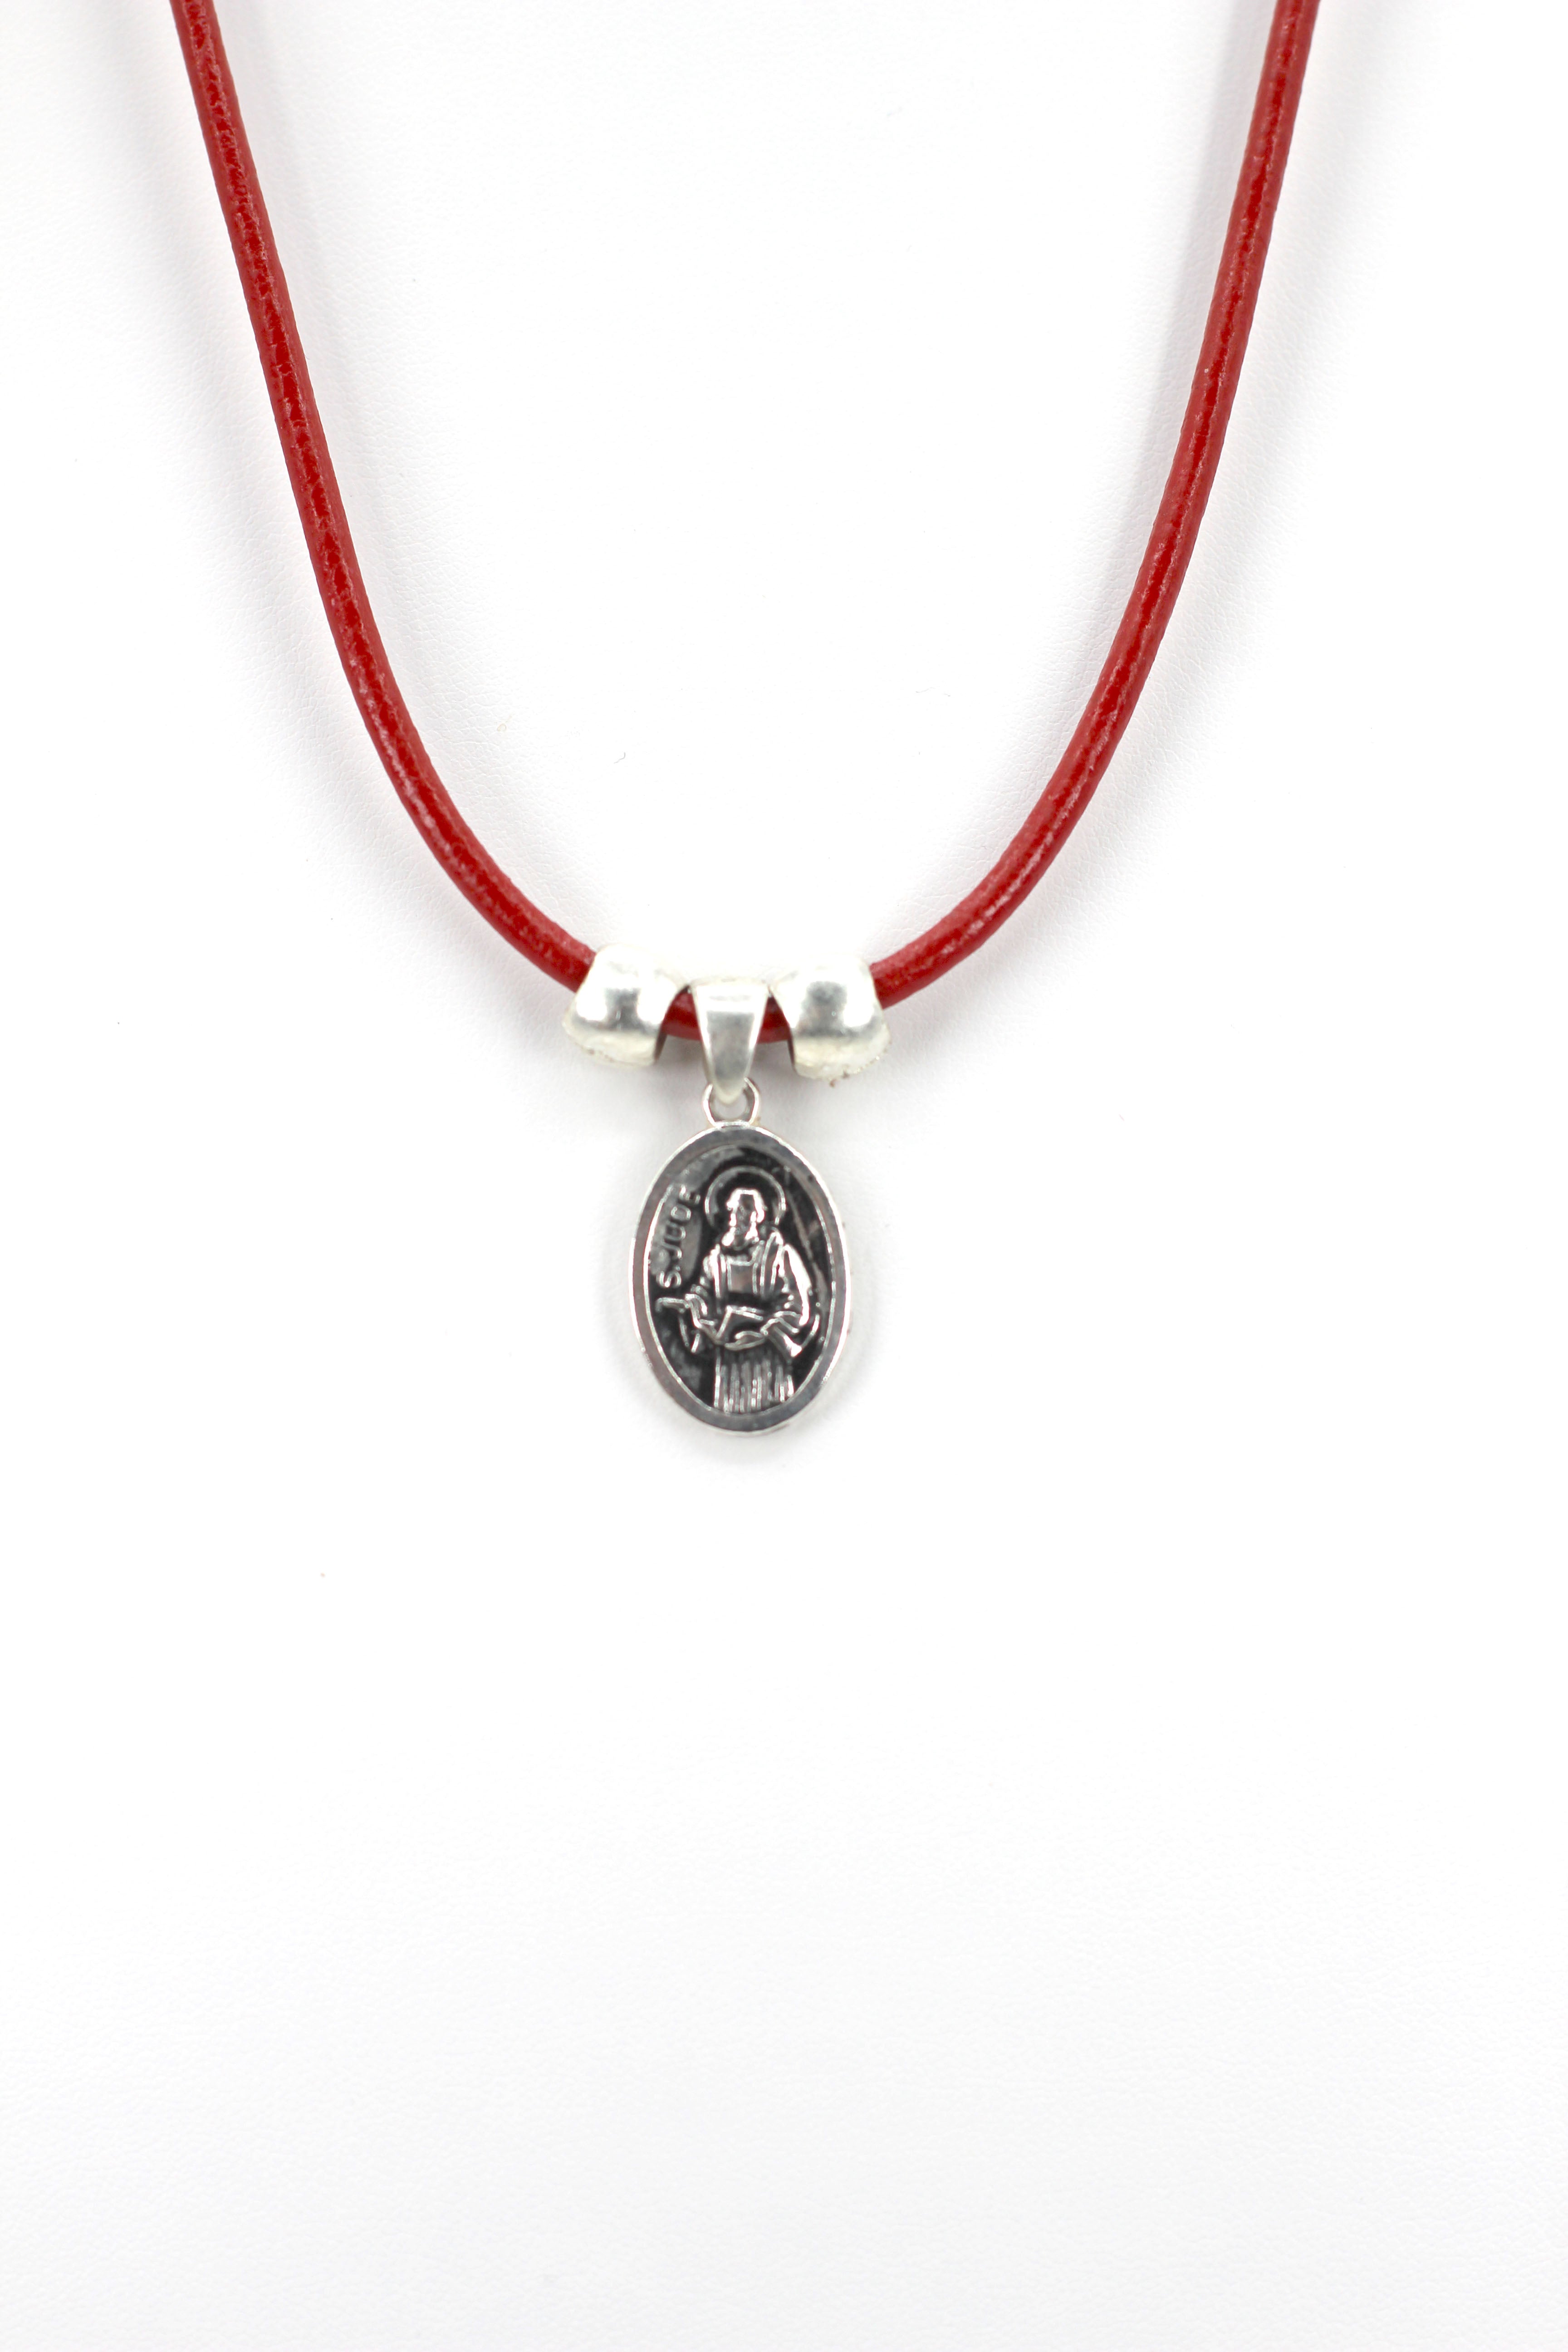 Vintage Necklace of Saint Jude Handmade Jewelry with Genuine Leather strap by Graciela's Collection